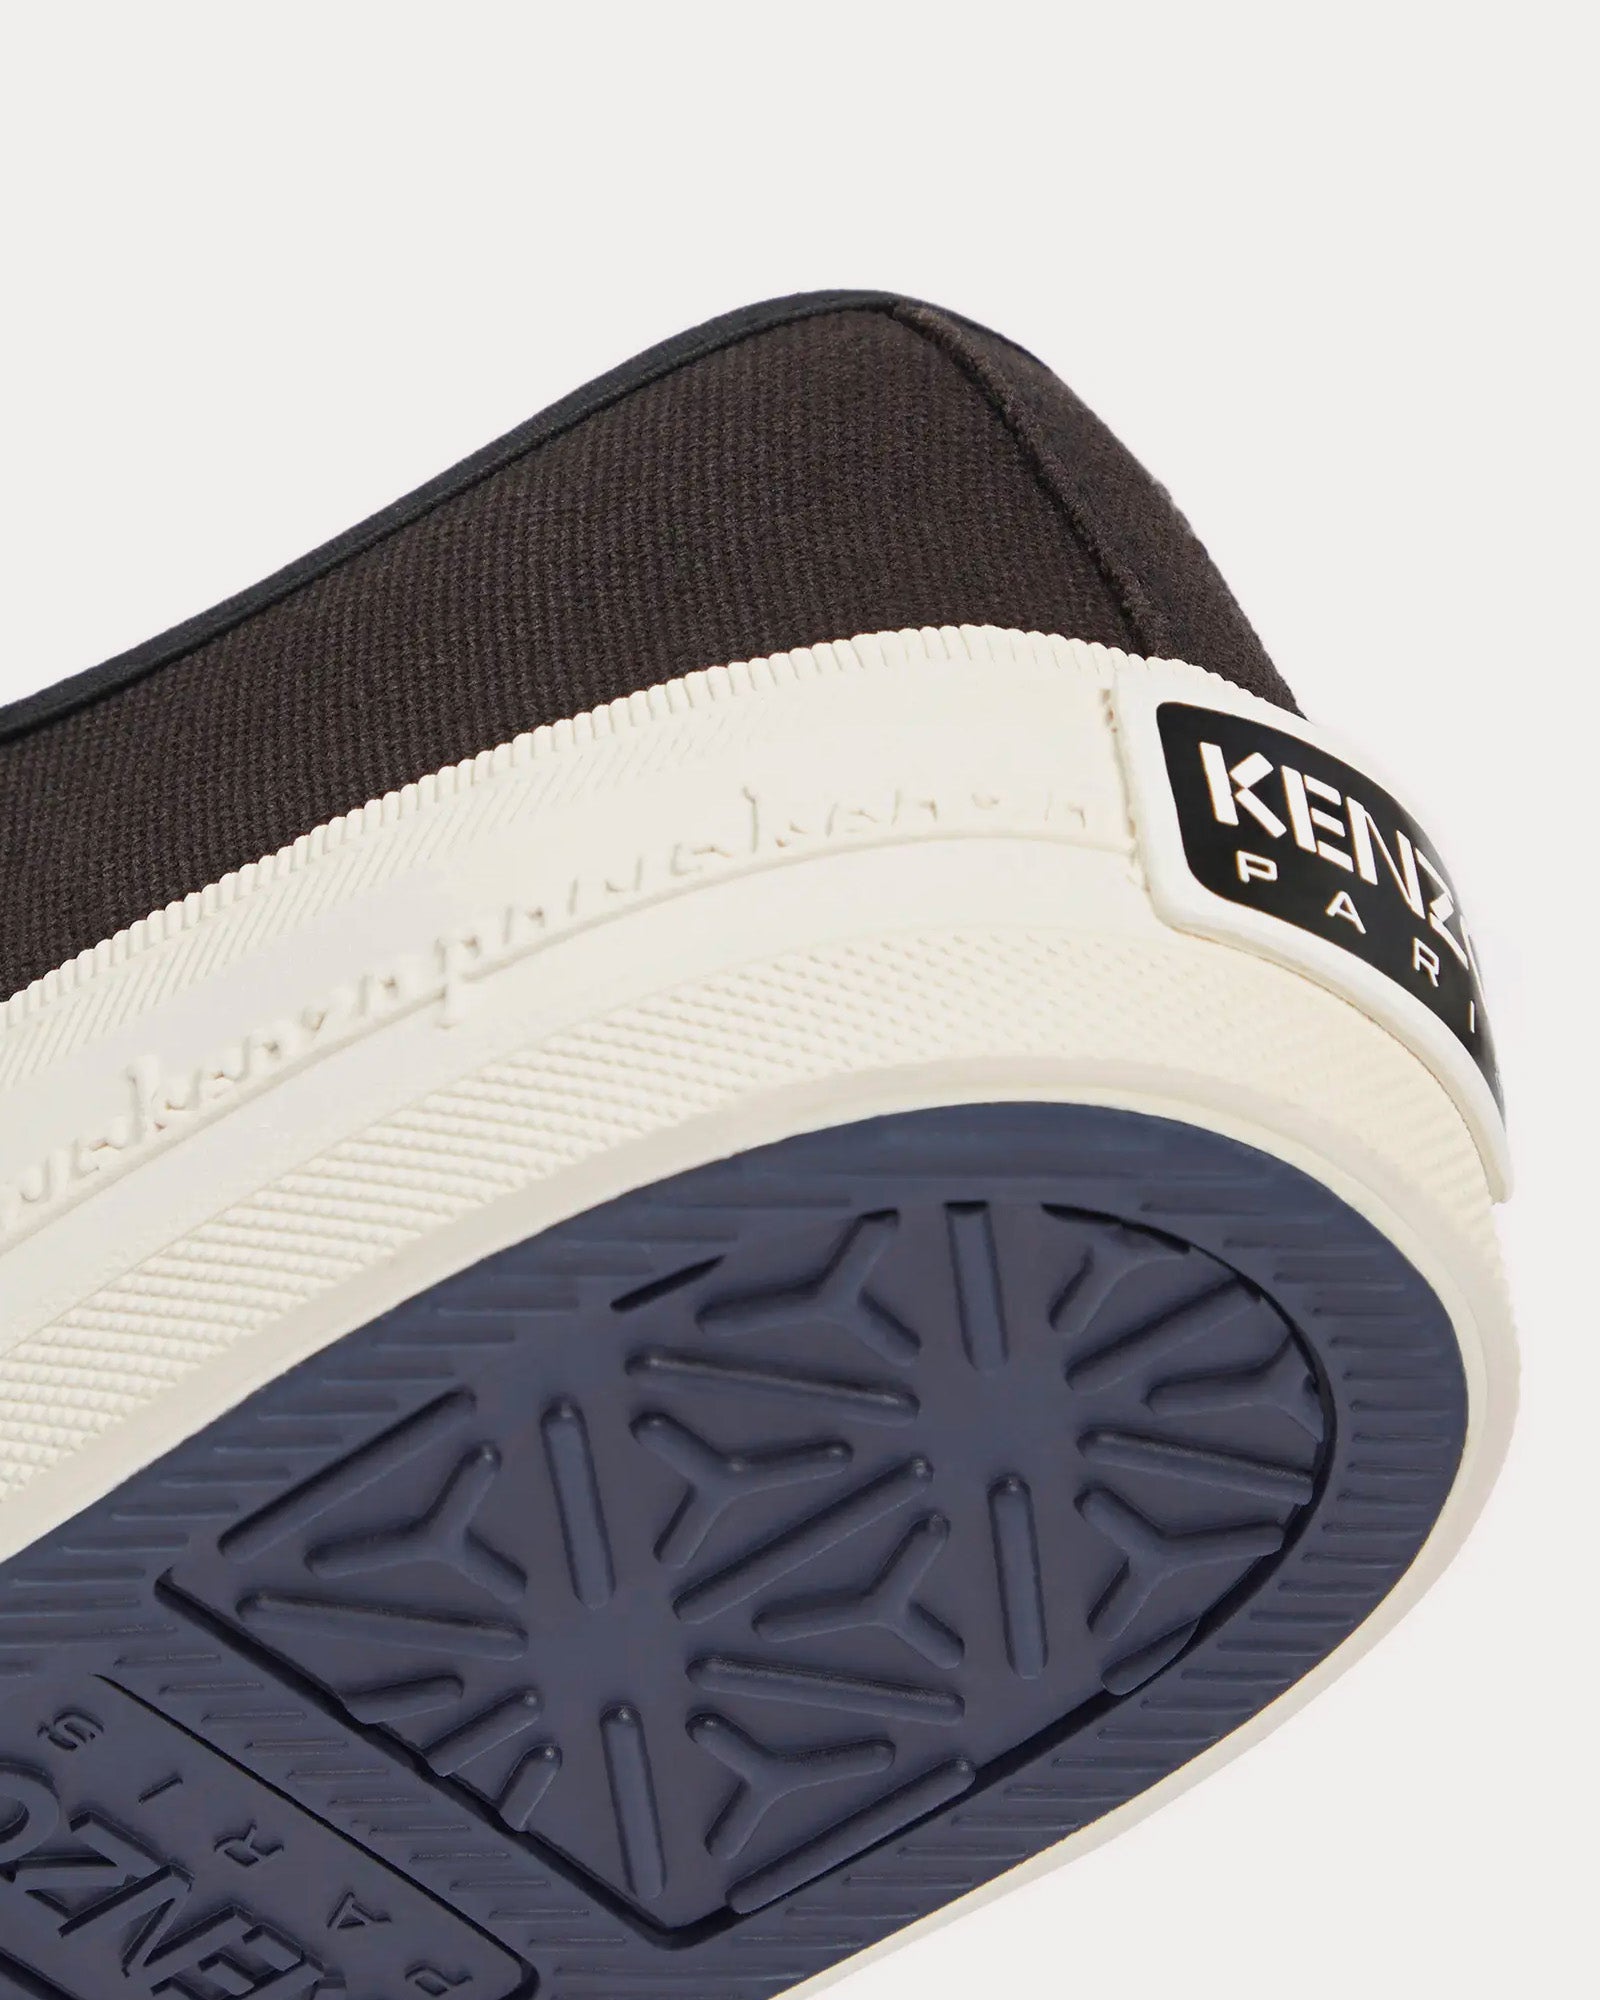 Kenzo - Kenzo Foxy Embroidered Canvas Black Low Top Sneakers